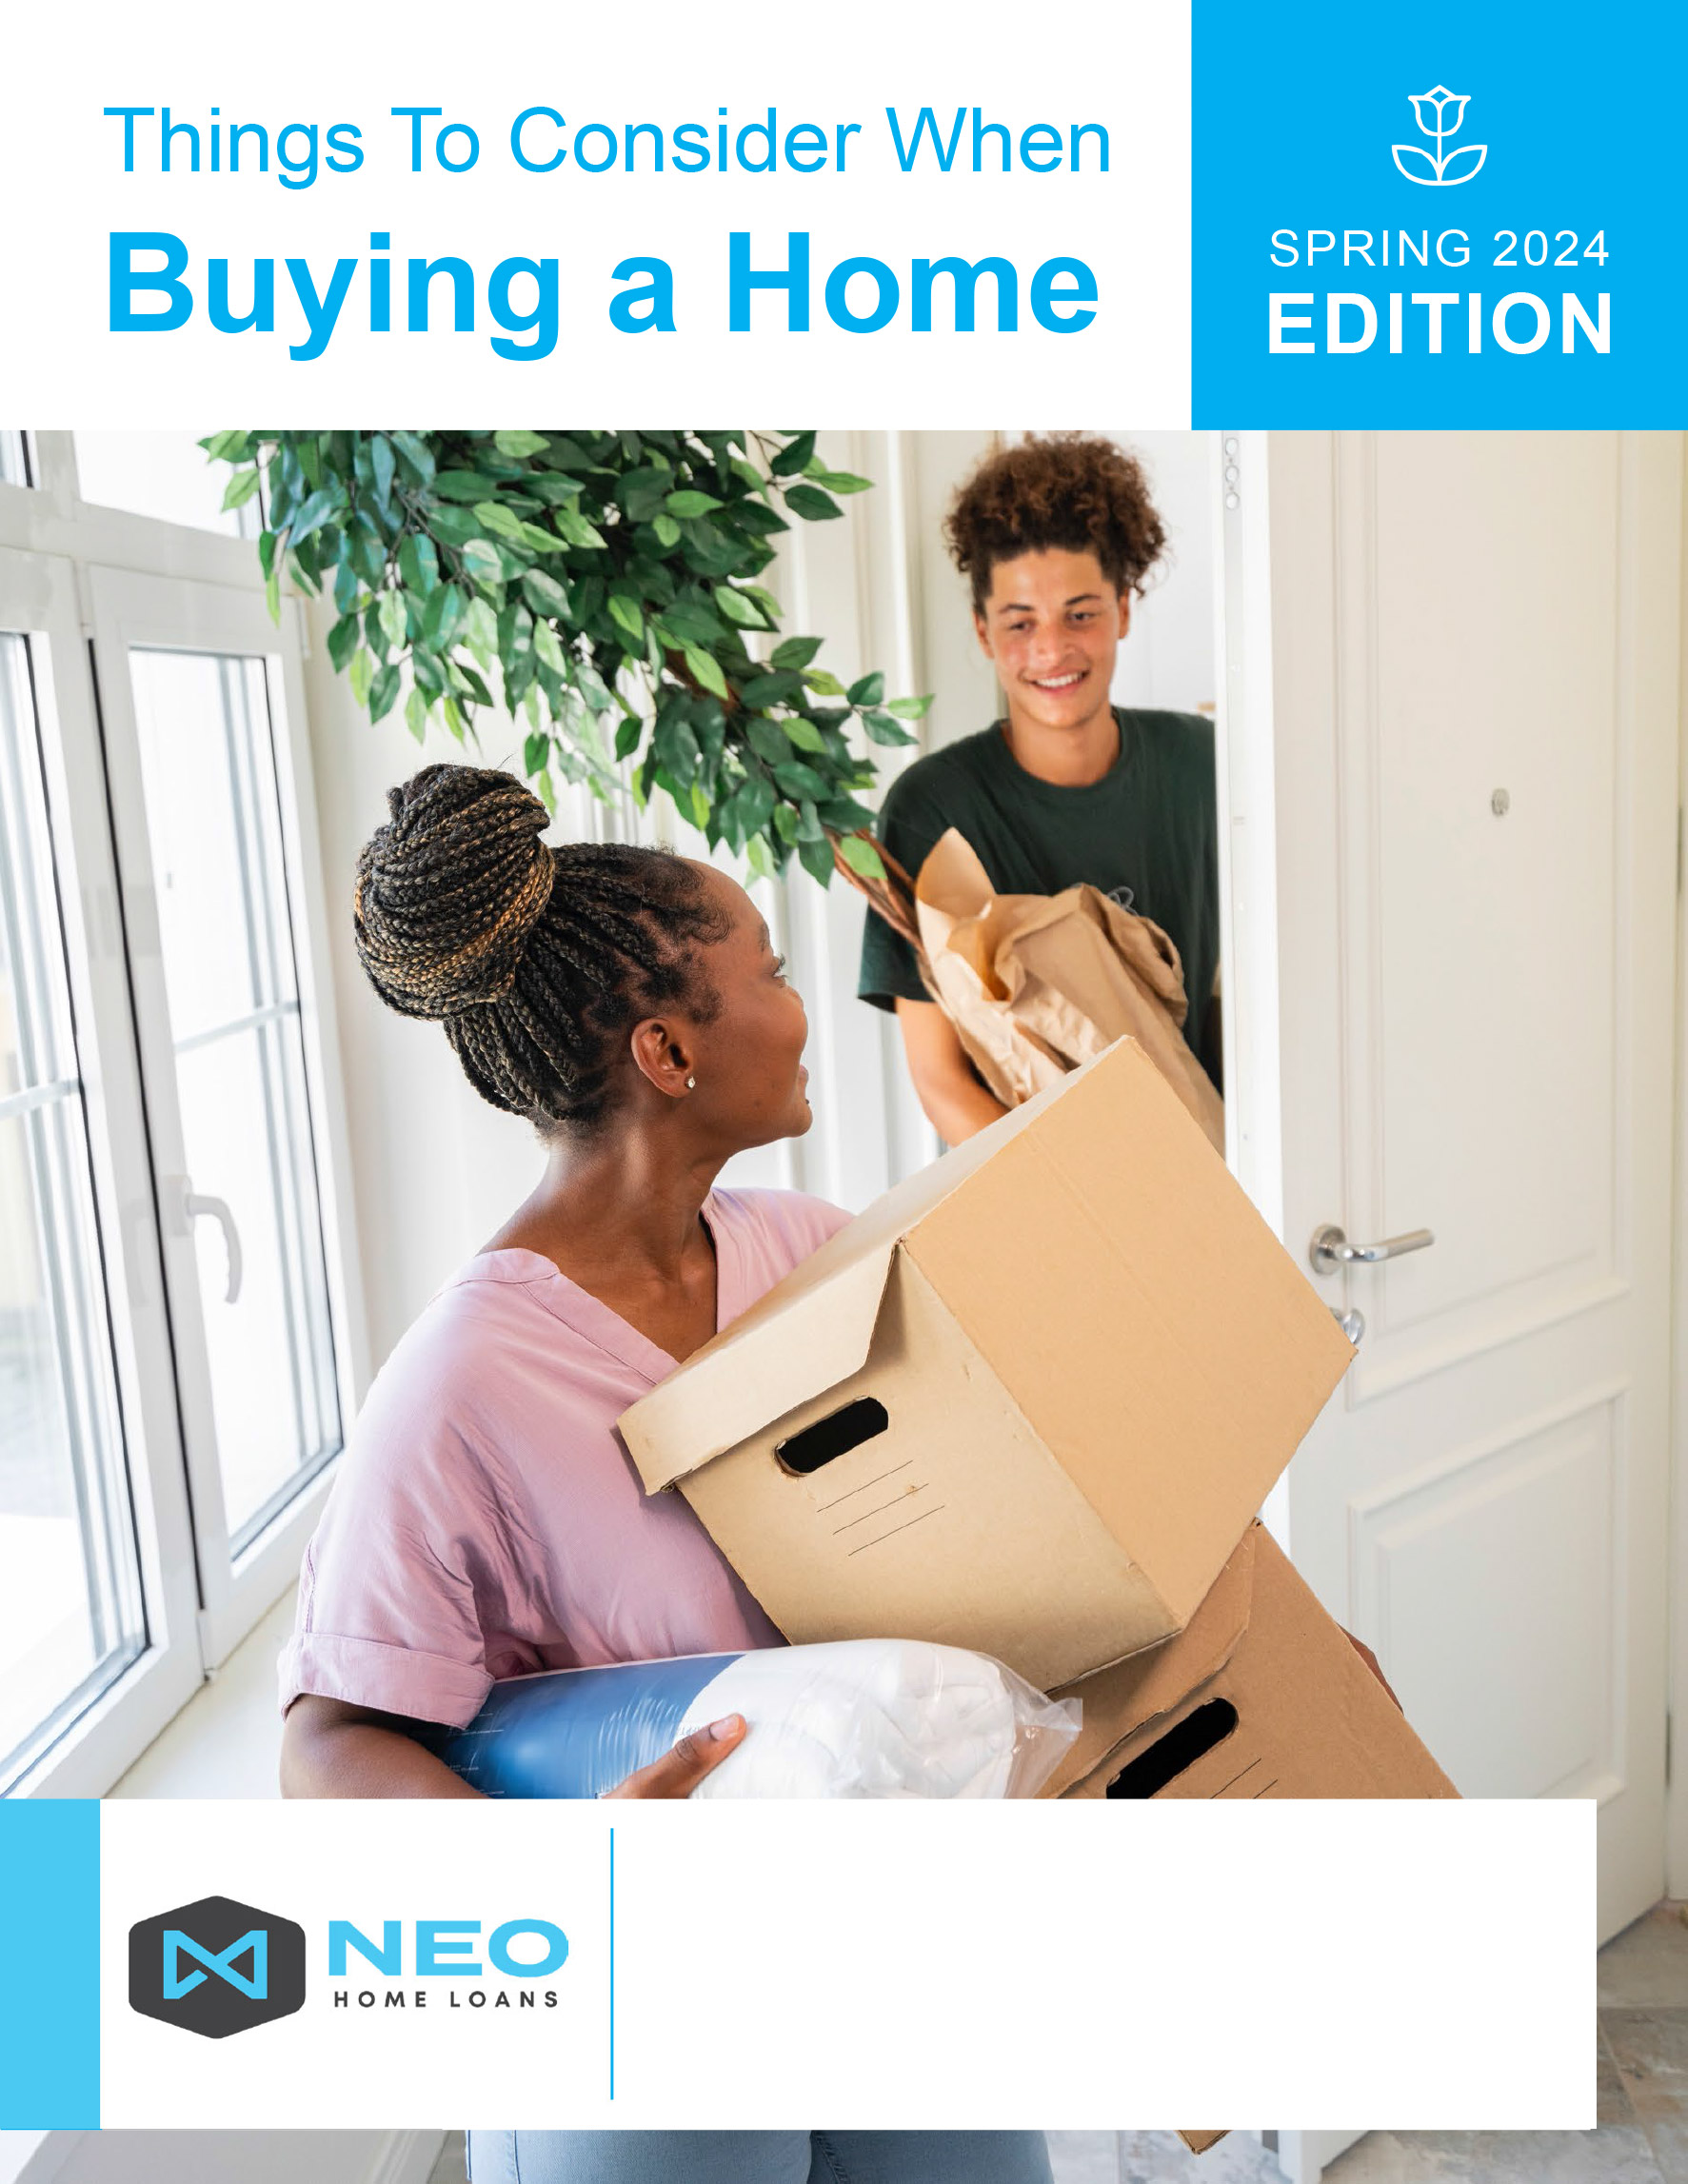 Things to Consider When Buying a Home